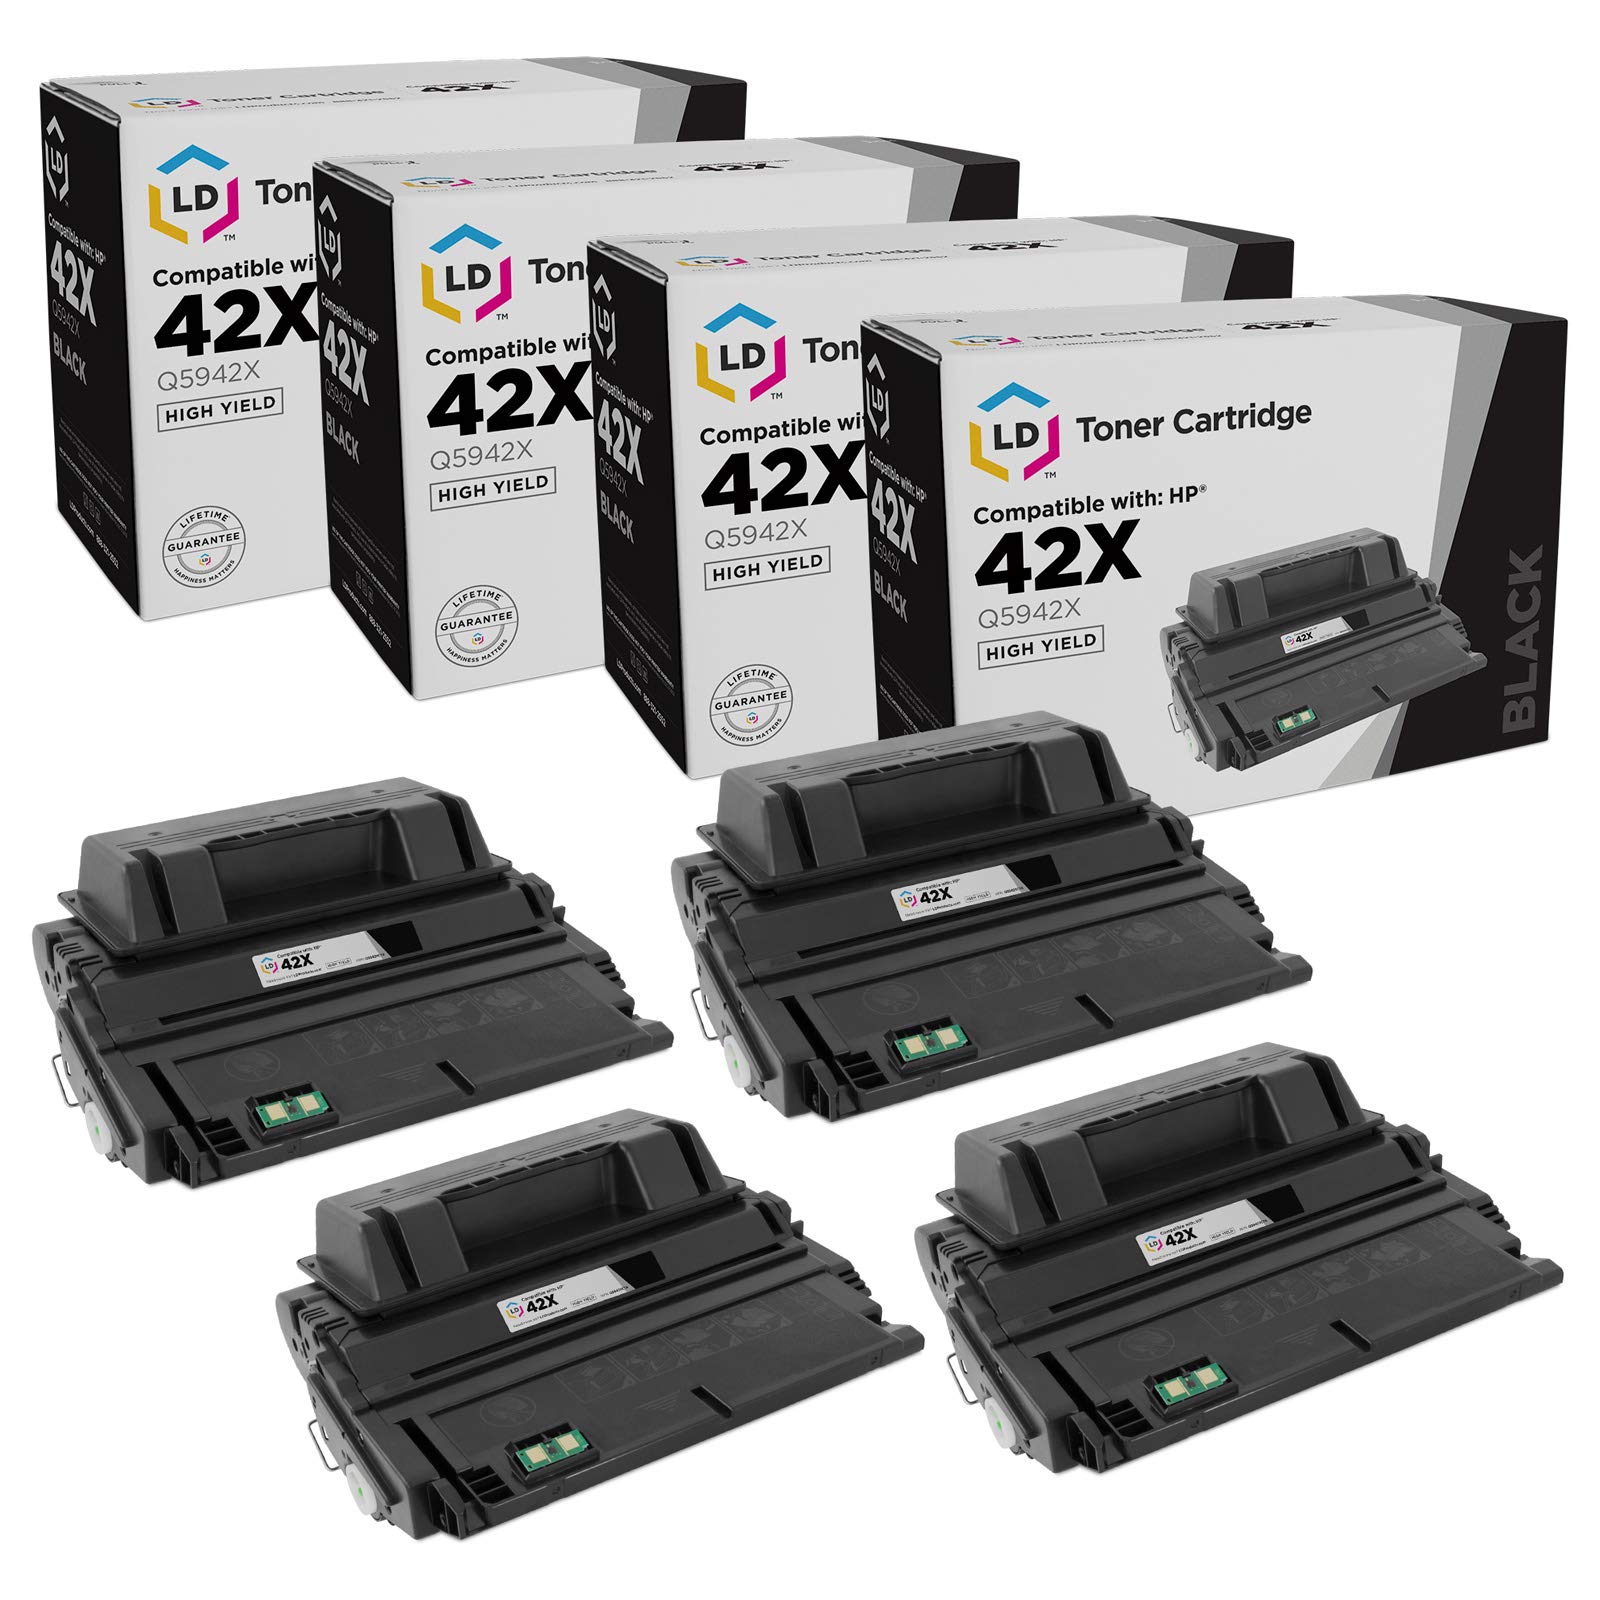 LD Compatible Toner Cartridge Replacement for HP 42X Q5942X High Yield (Black, 4-Pack)